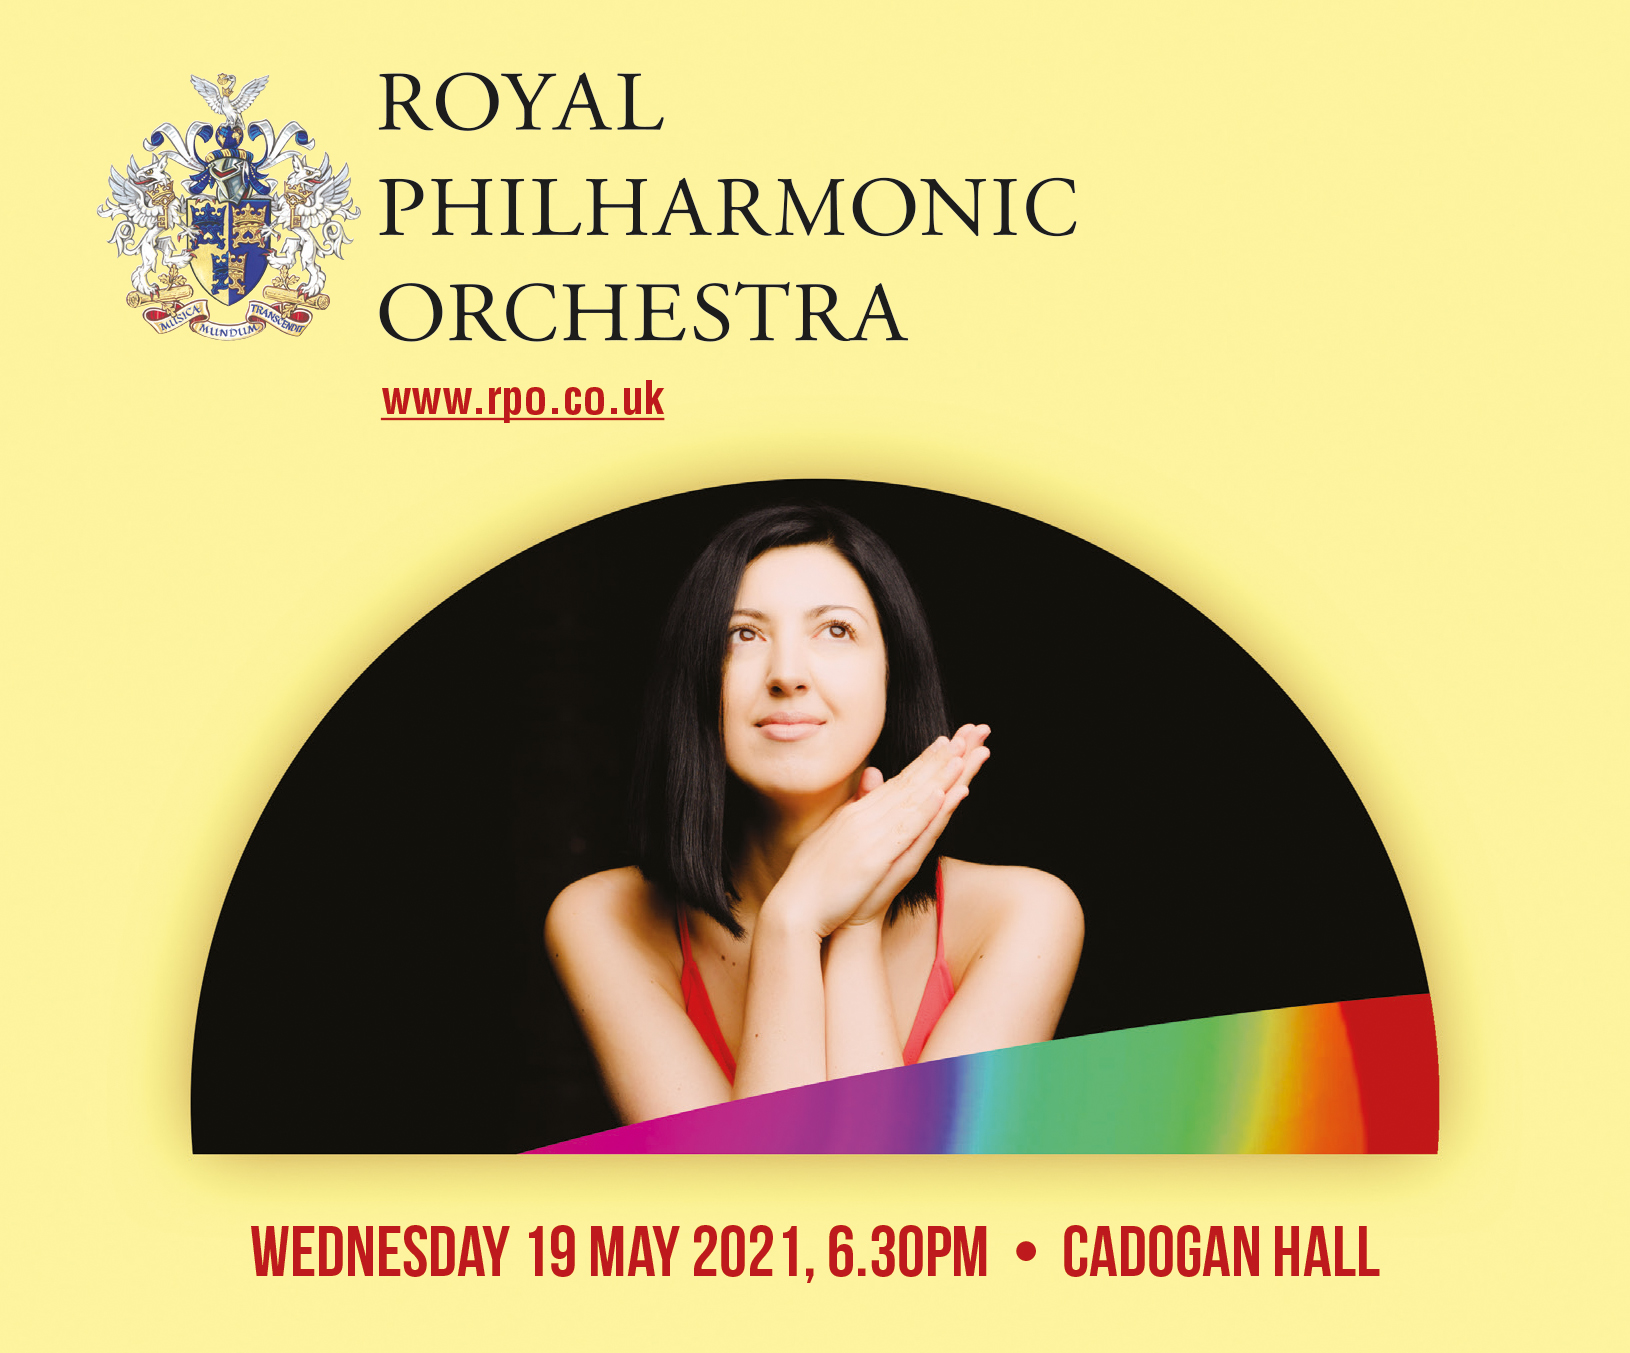 A preview image of a digital programme for 19 May 2021 at Cadogan Hall